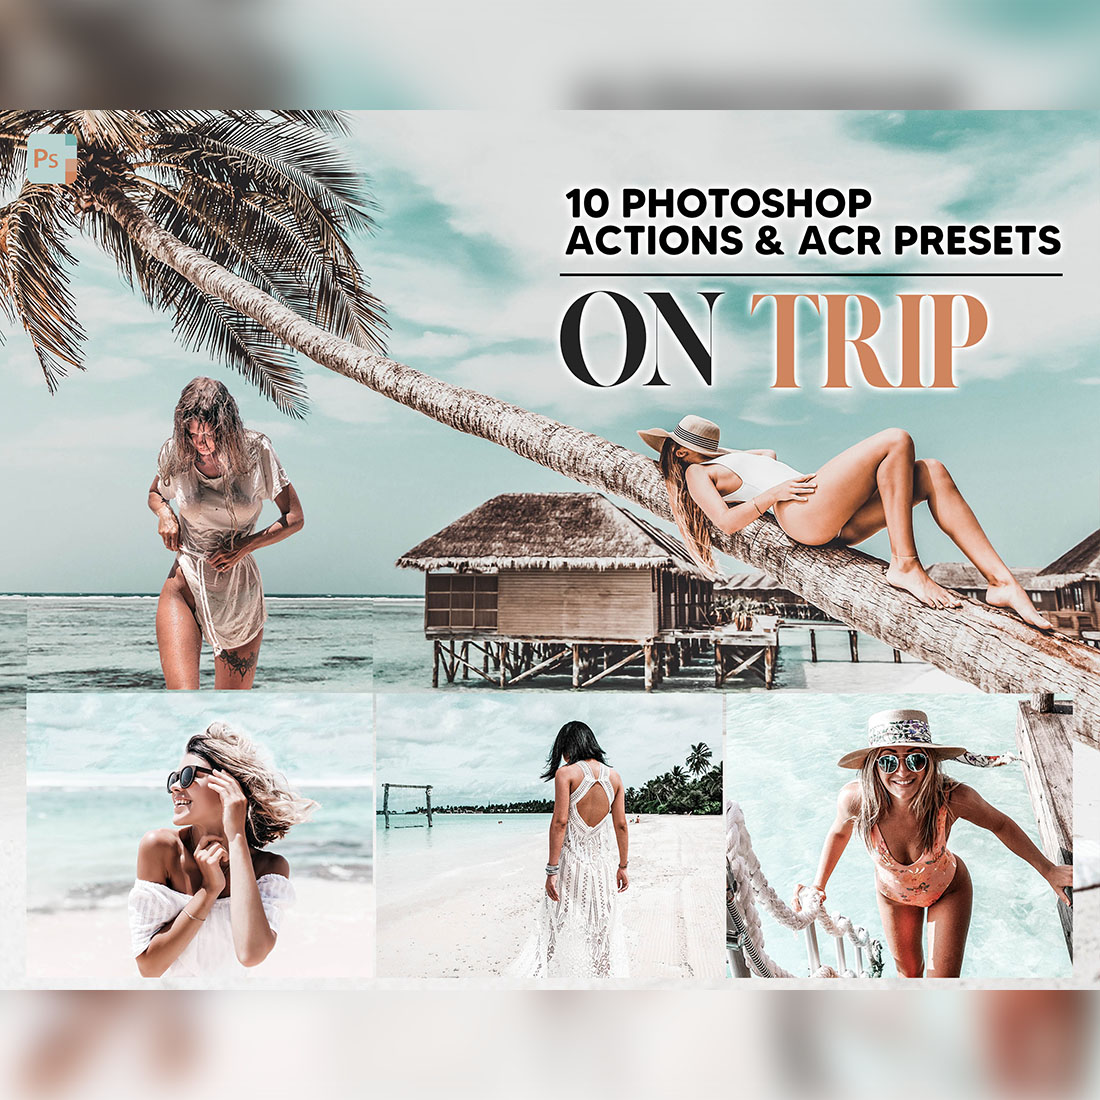 10 Photoshop Actions, On Trip Ps Action, Summer ACR Preset, Beach Ps Filter, Atn Portrait And Lifestyle Theme For Instagram, Blogge cover image.